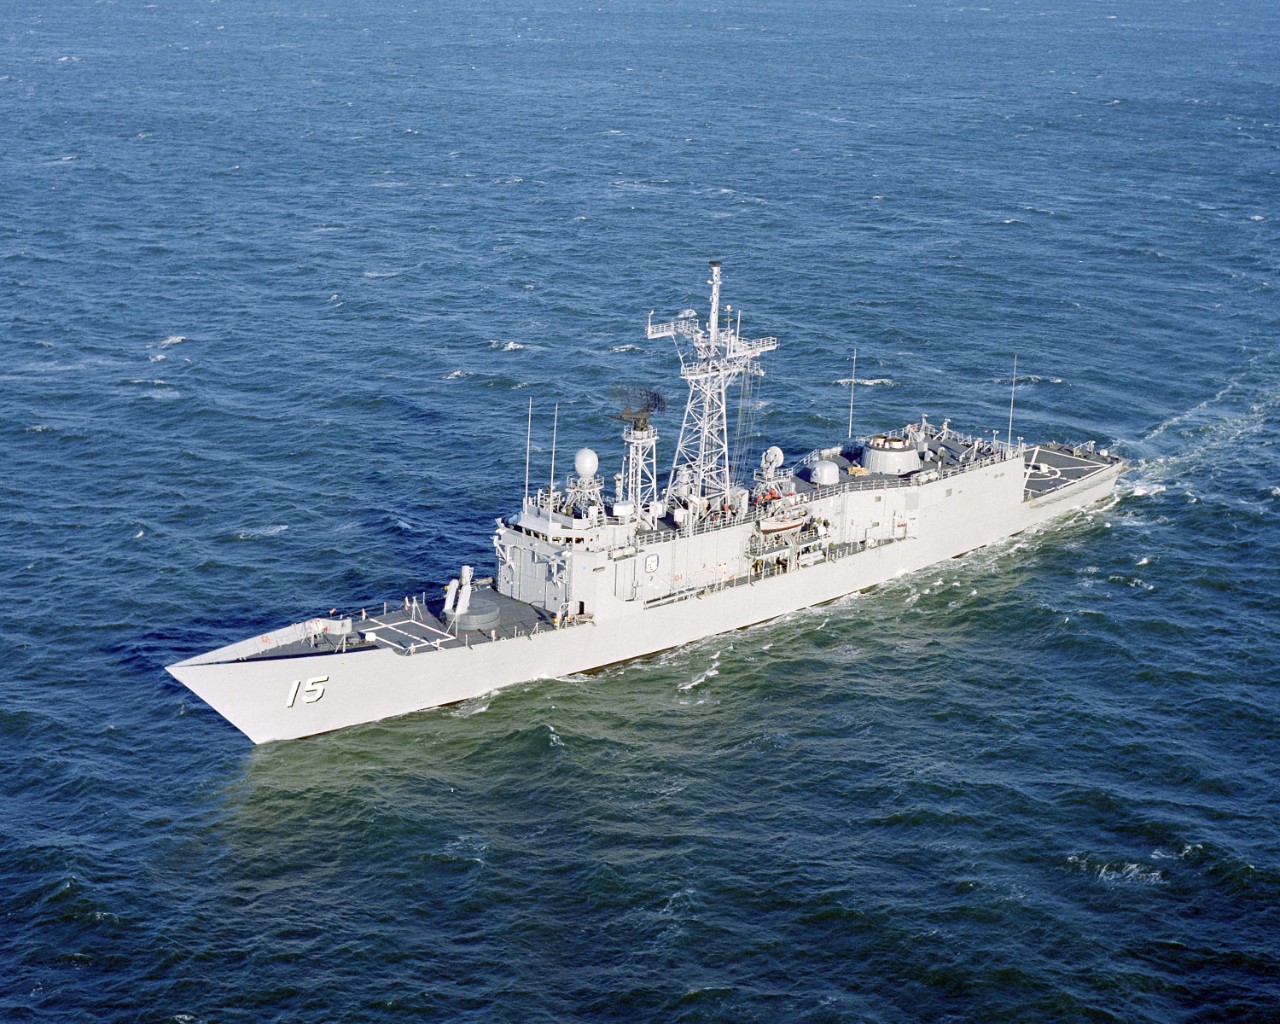 Estocin underway in the Atlantic, 1983. (U.S. Navy Photograph DN-SC-87-05374, National Archives and Records Administration, Still Pictures Division, College Park, Md.)